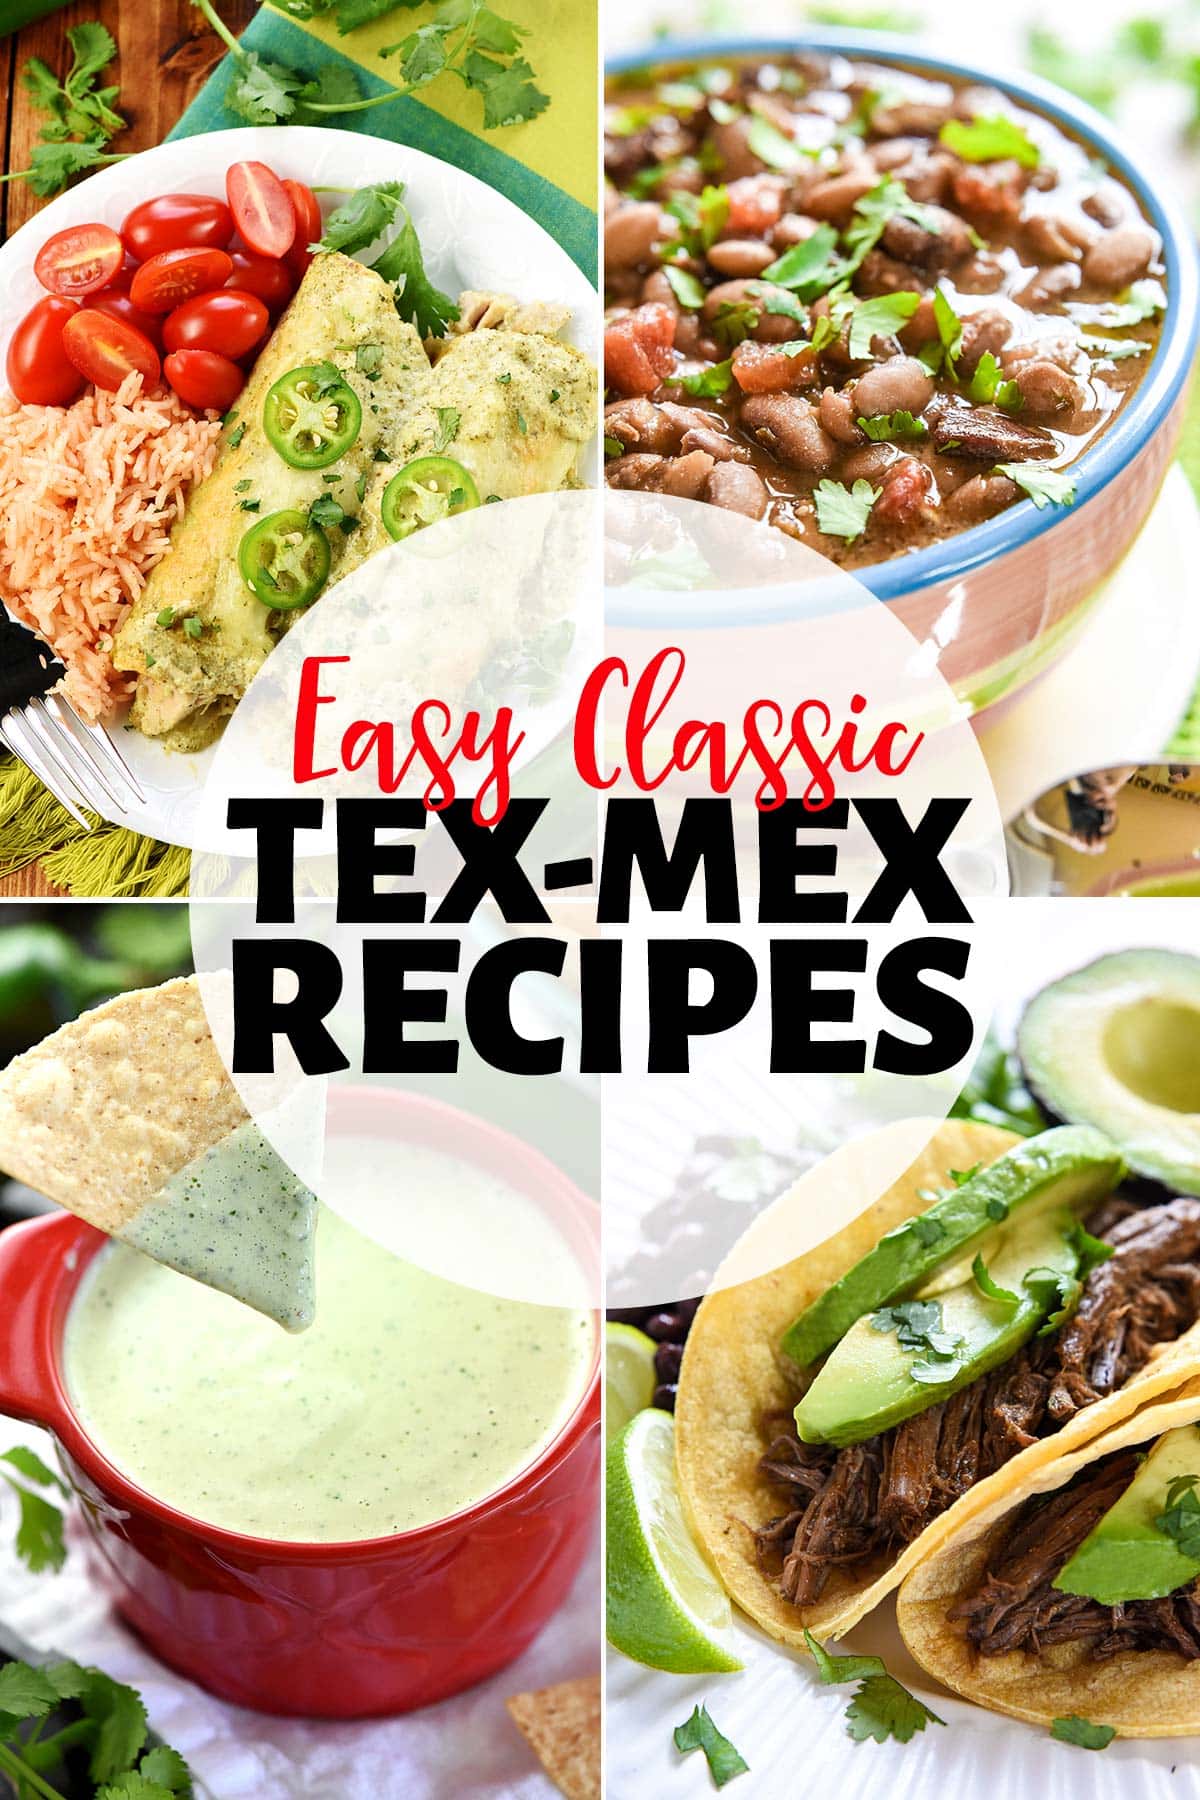 The BEST Tex-Mex Recipes ~ this scrumptious collection of recipes is perfect for Taco Tuesday, Cinco de Mayo, or any day of the year! From tacos to enchiladas, from salsa to queso, from rice to beans, from drinks to dessert (and so much more!), these classic Tex-Mex food ideas are easy to make from scratch and absolutely mouthwatering. | FiveHeartHome.com via @fivehearthome